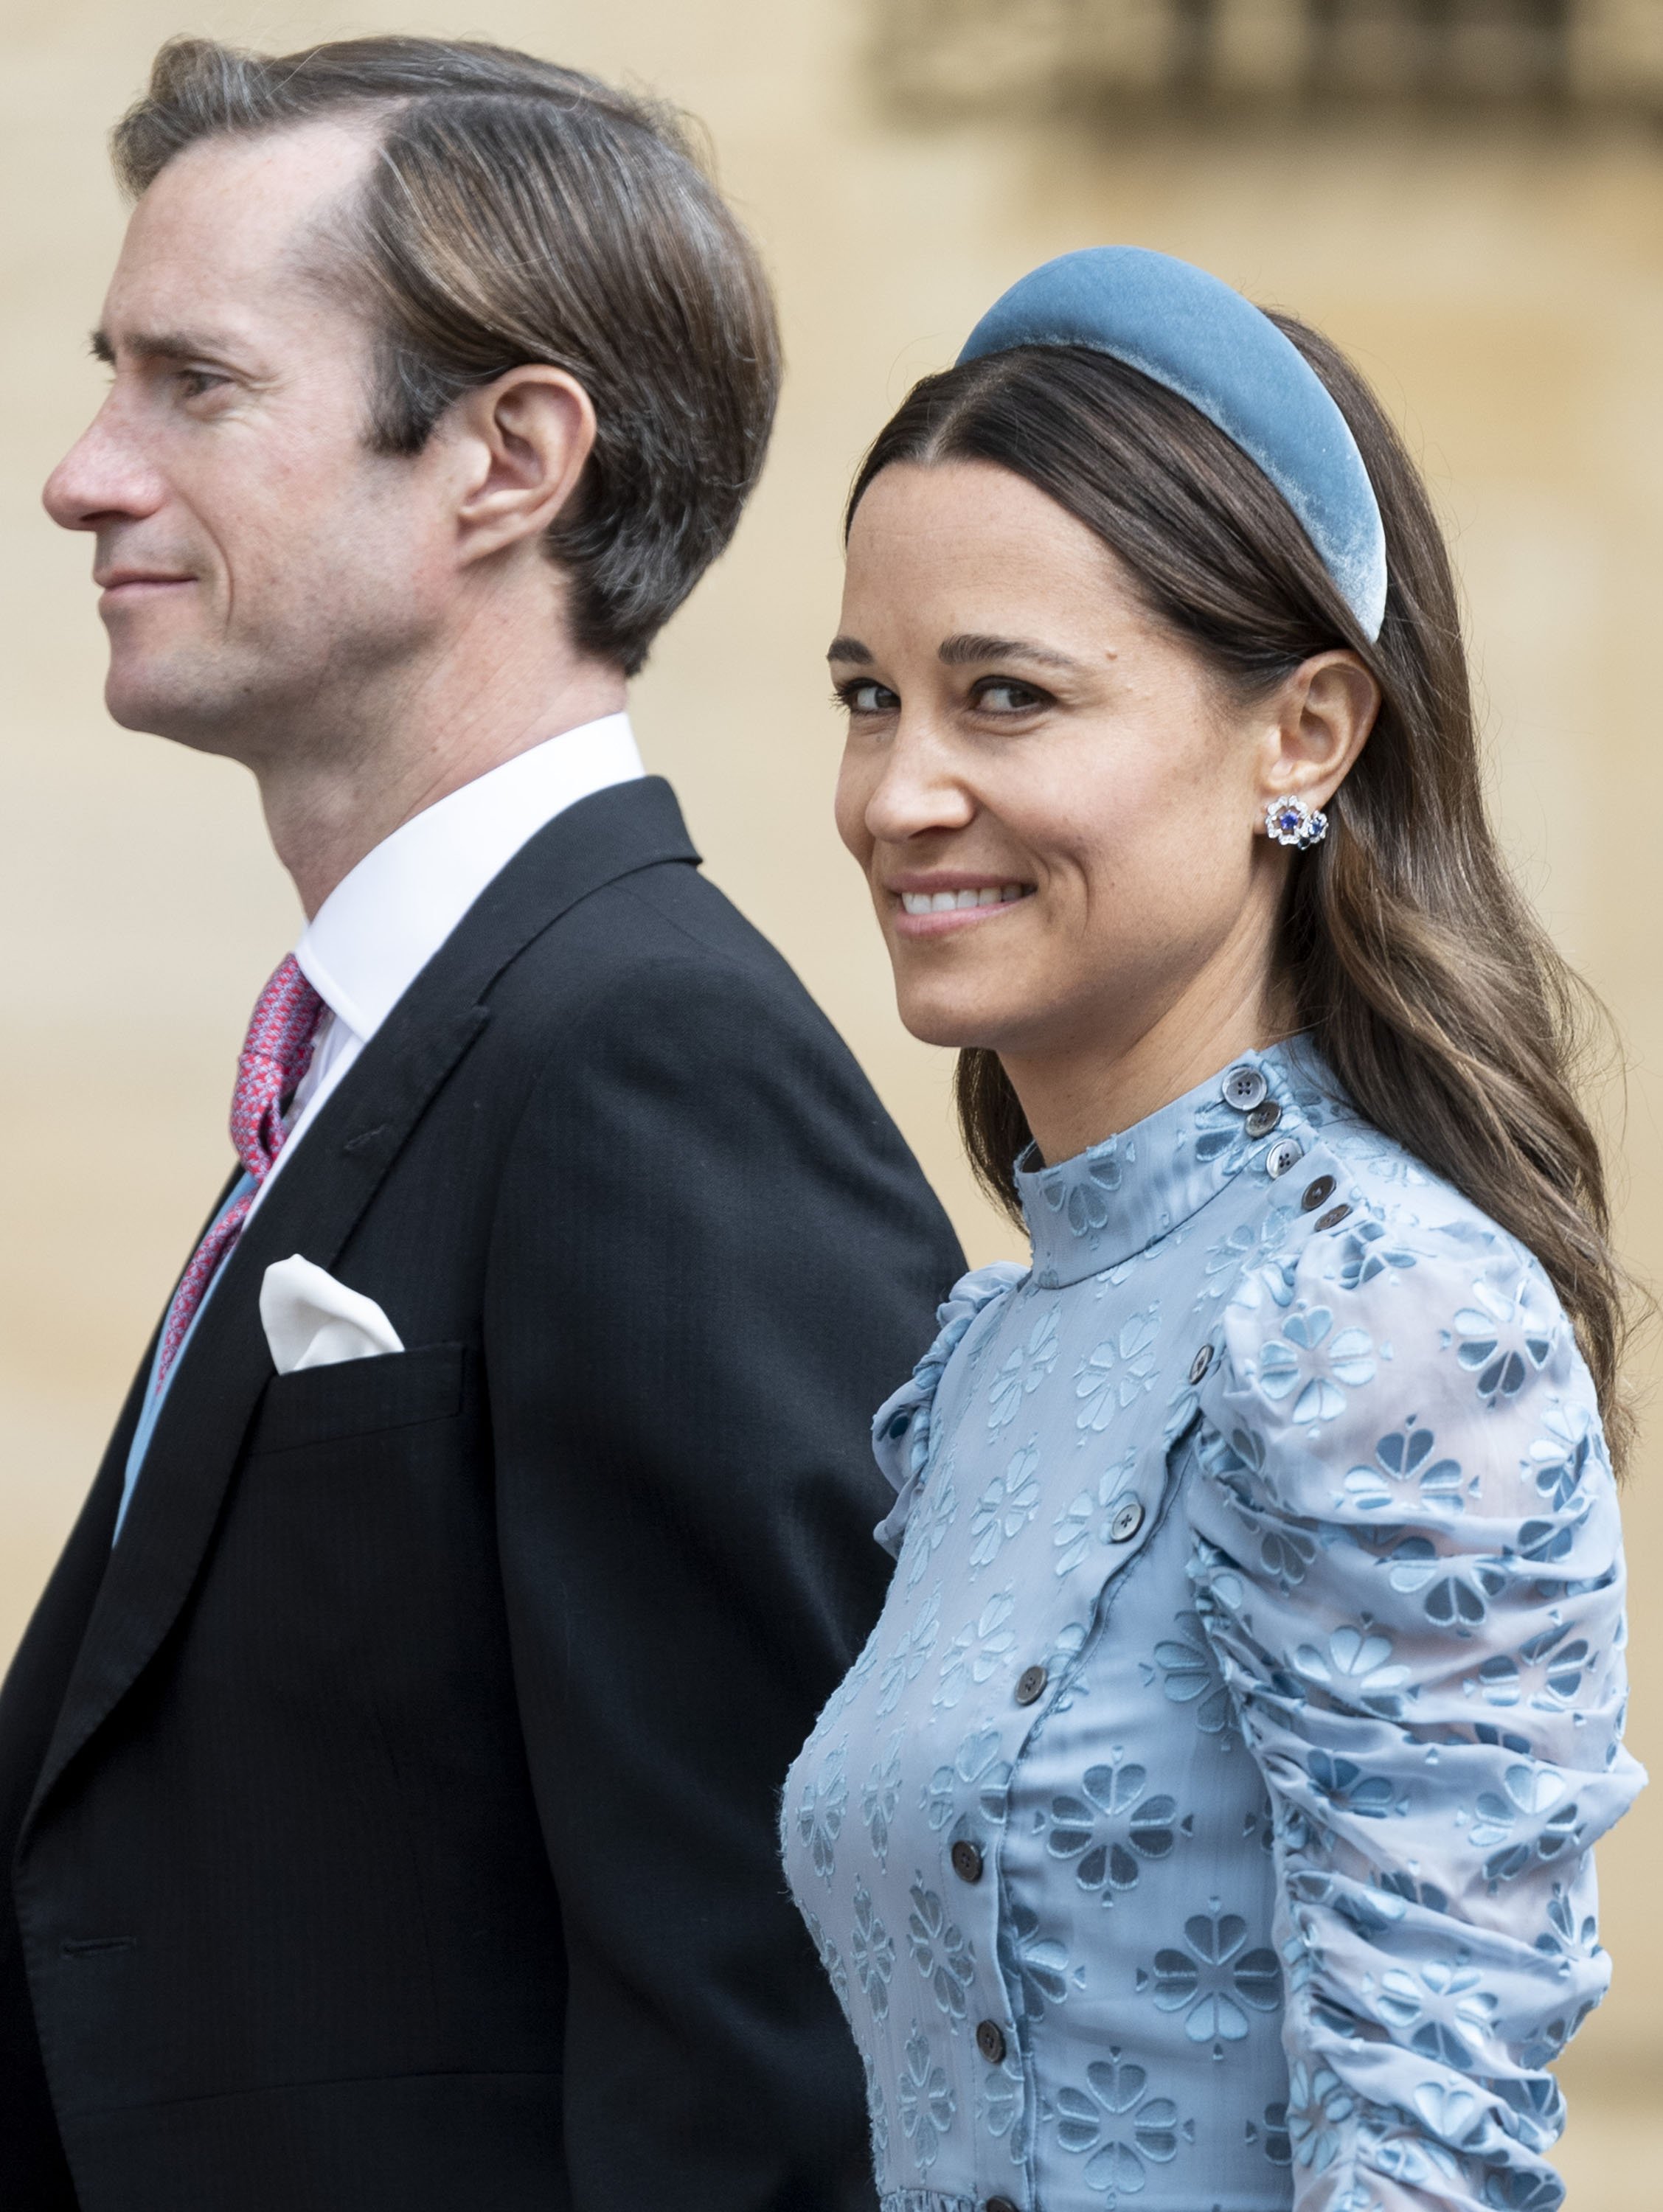 James Matthews and Pippa Matthews during the wedding of Lady Gabriella Windsor and Mr Thomas Kingston at St George's Chapel on May 18, 2019 in Windsor, England. | Source: Getty Images